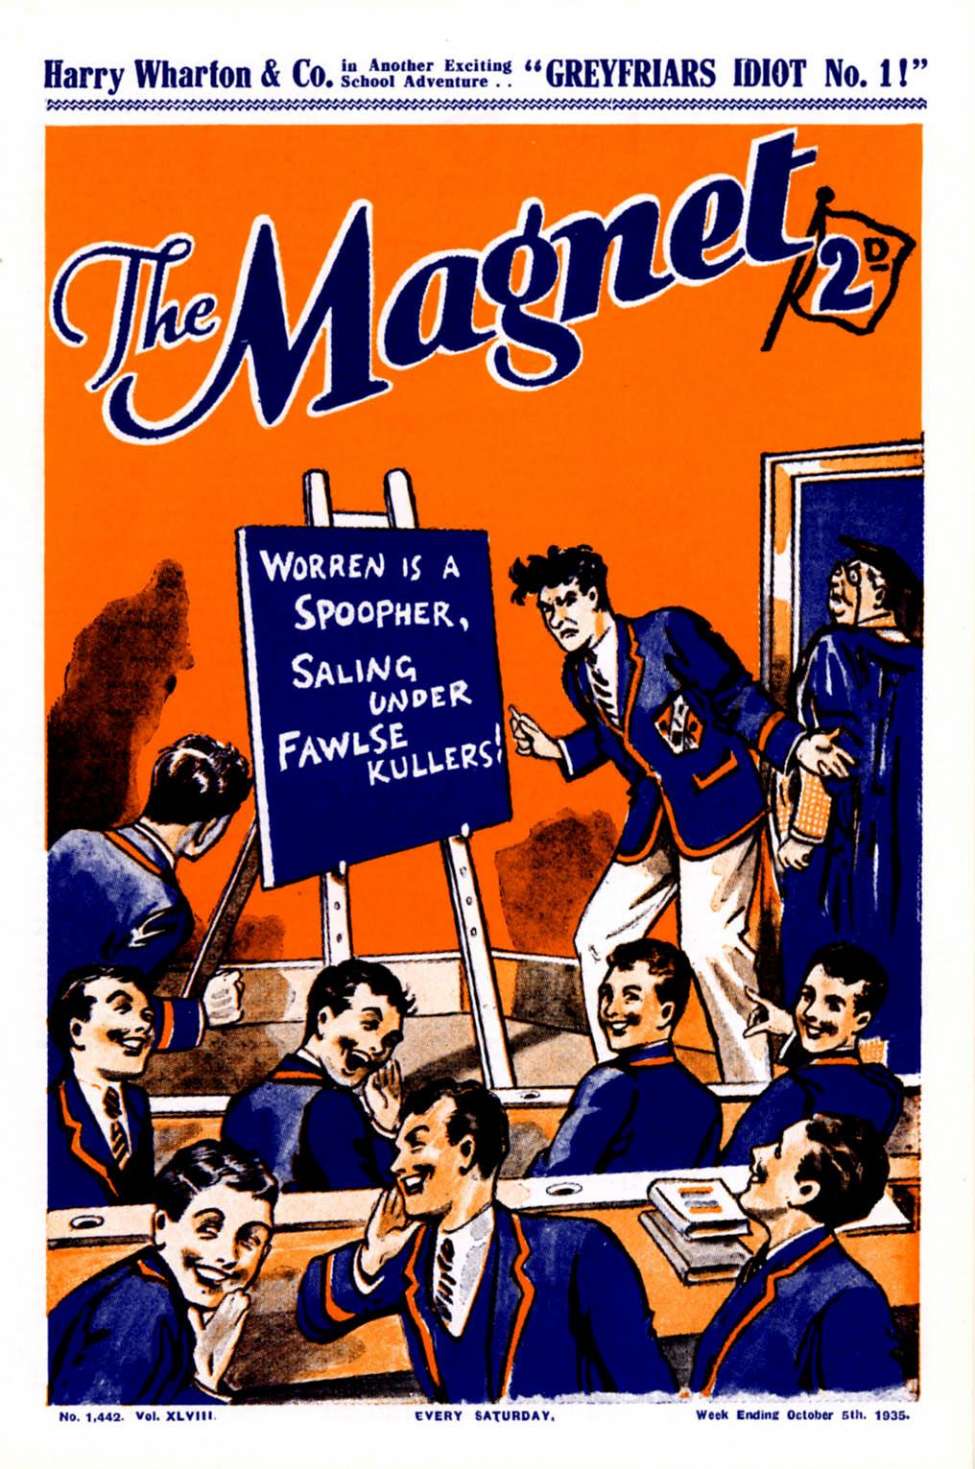 Book Cover For The Magnet 1442 - Greyfriars Idiot #1!